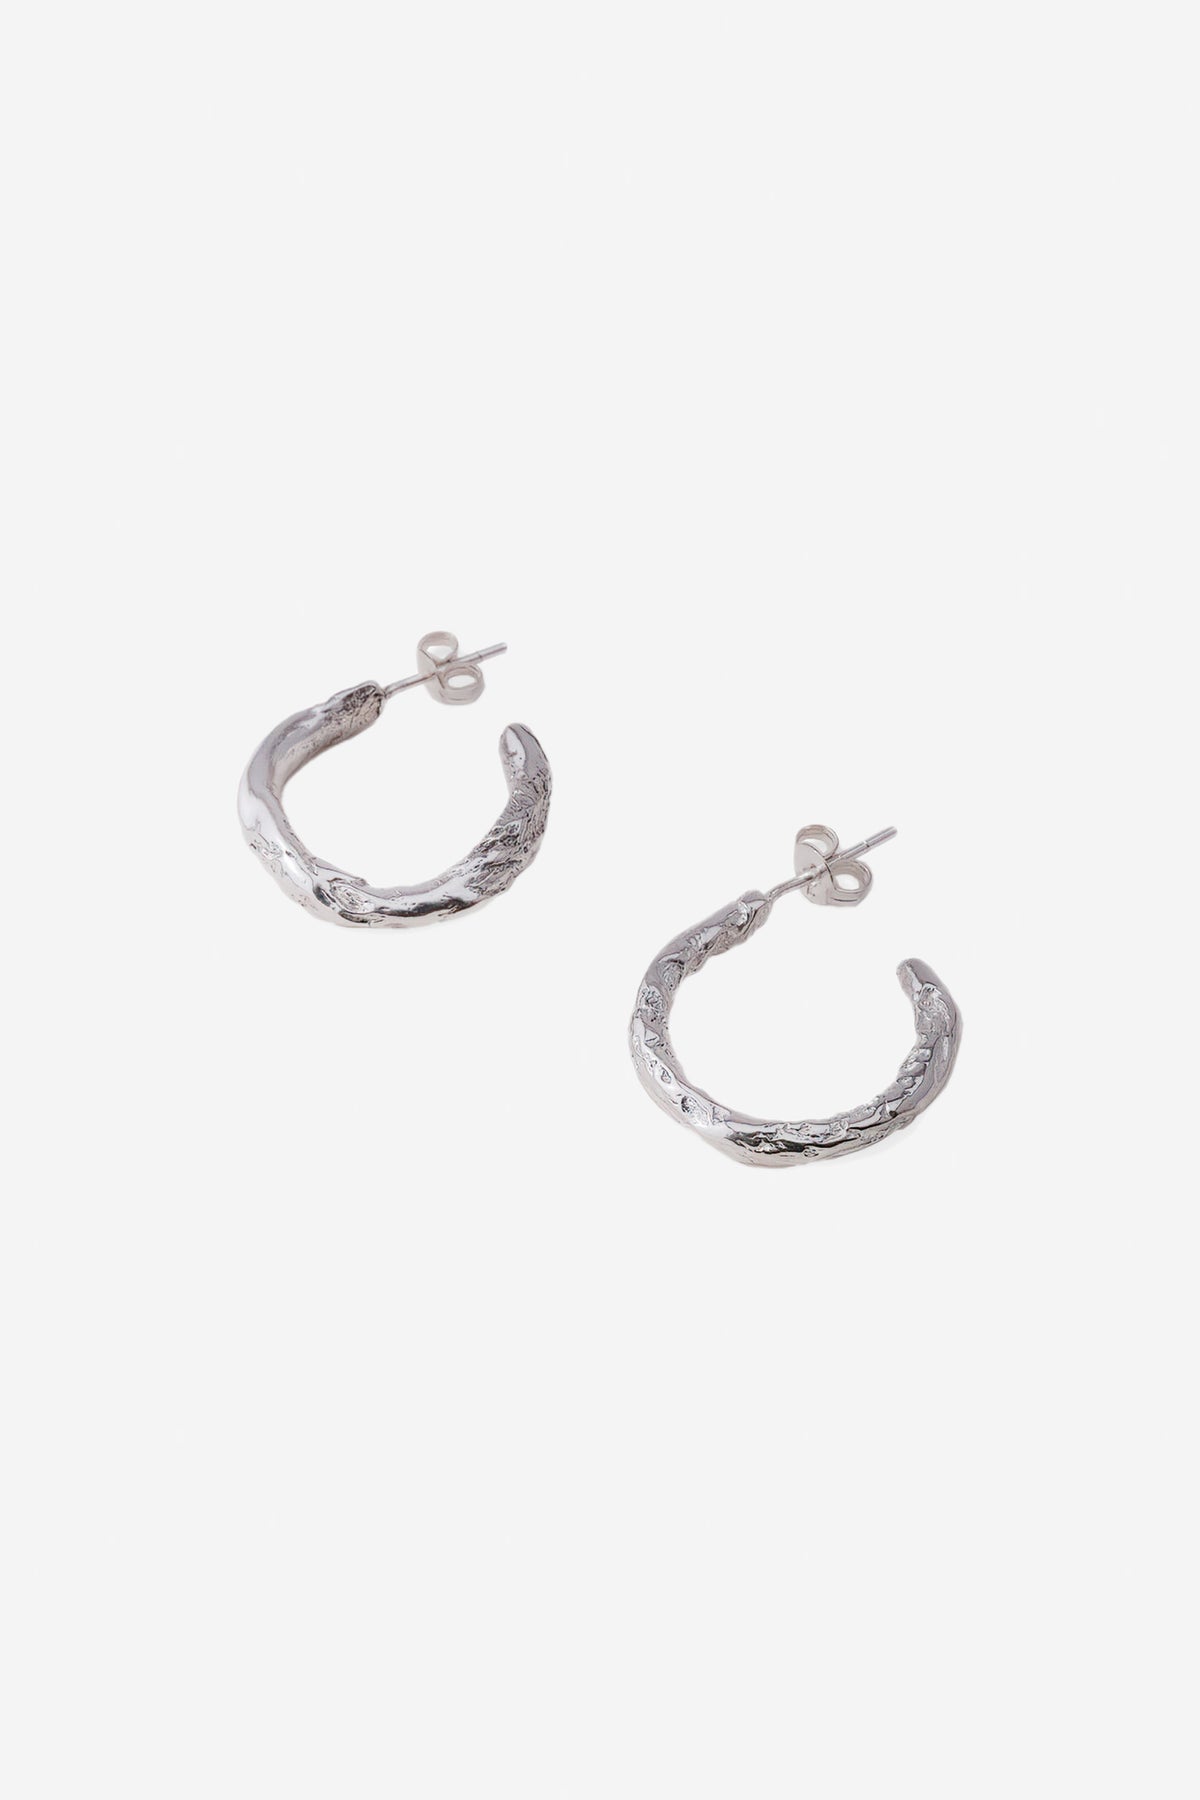 Tilda Small Stoned Hoops // Silver